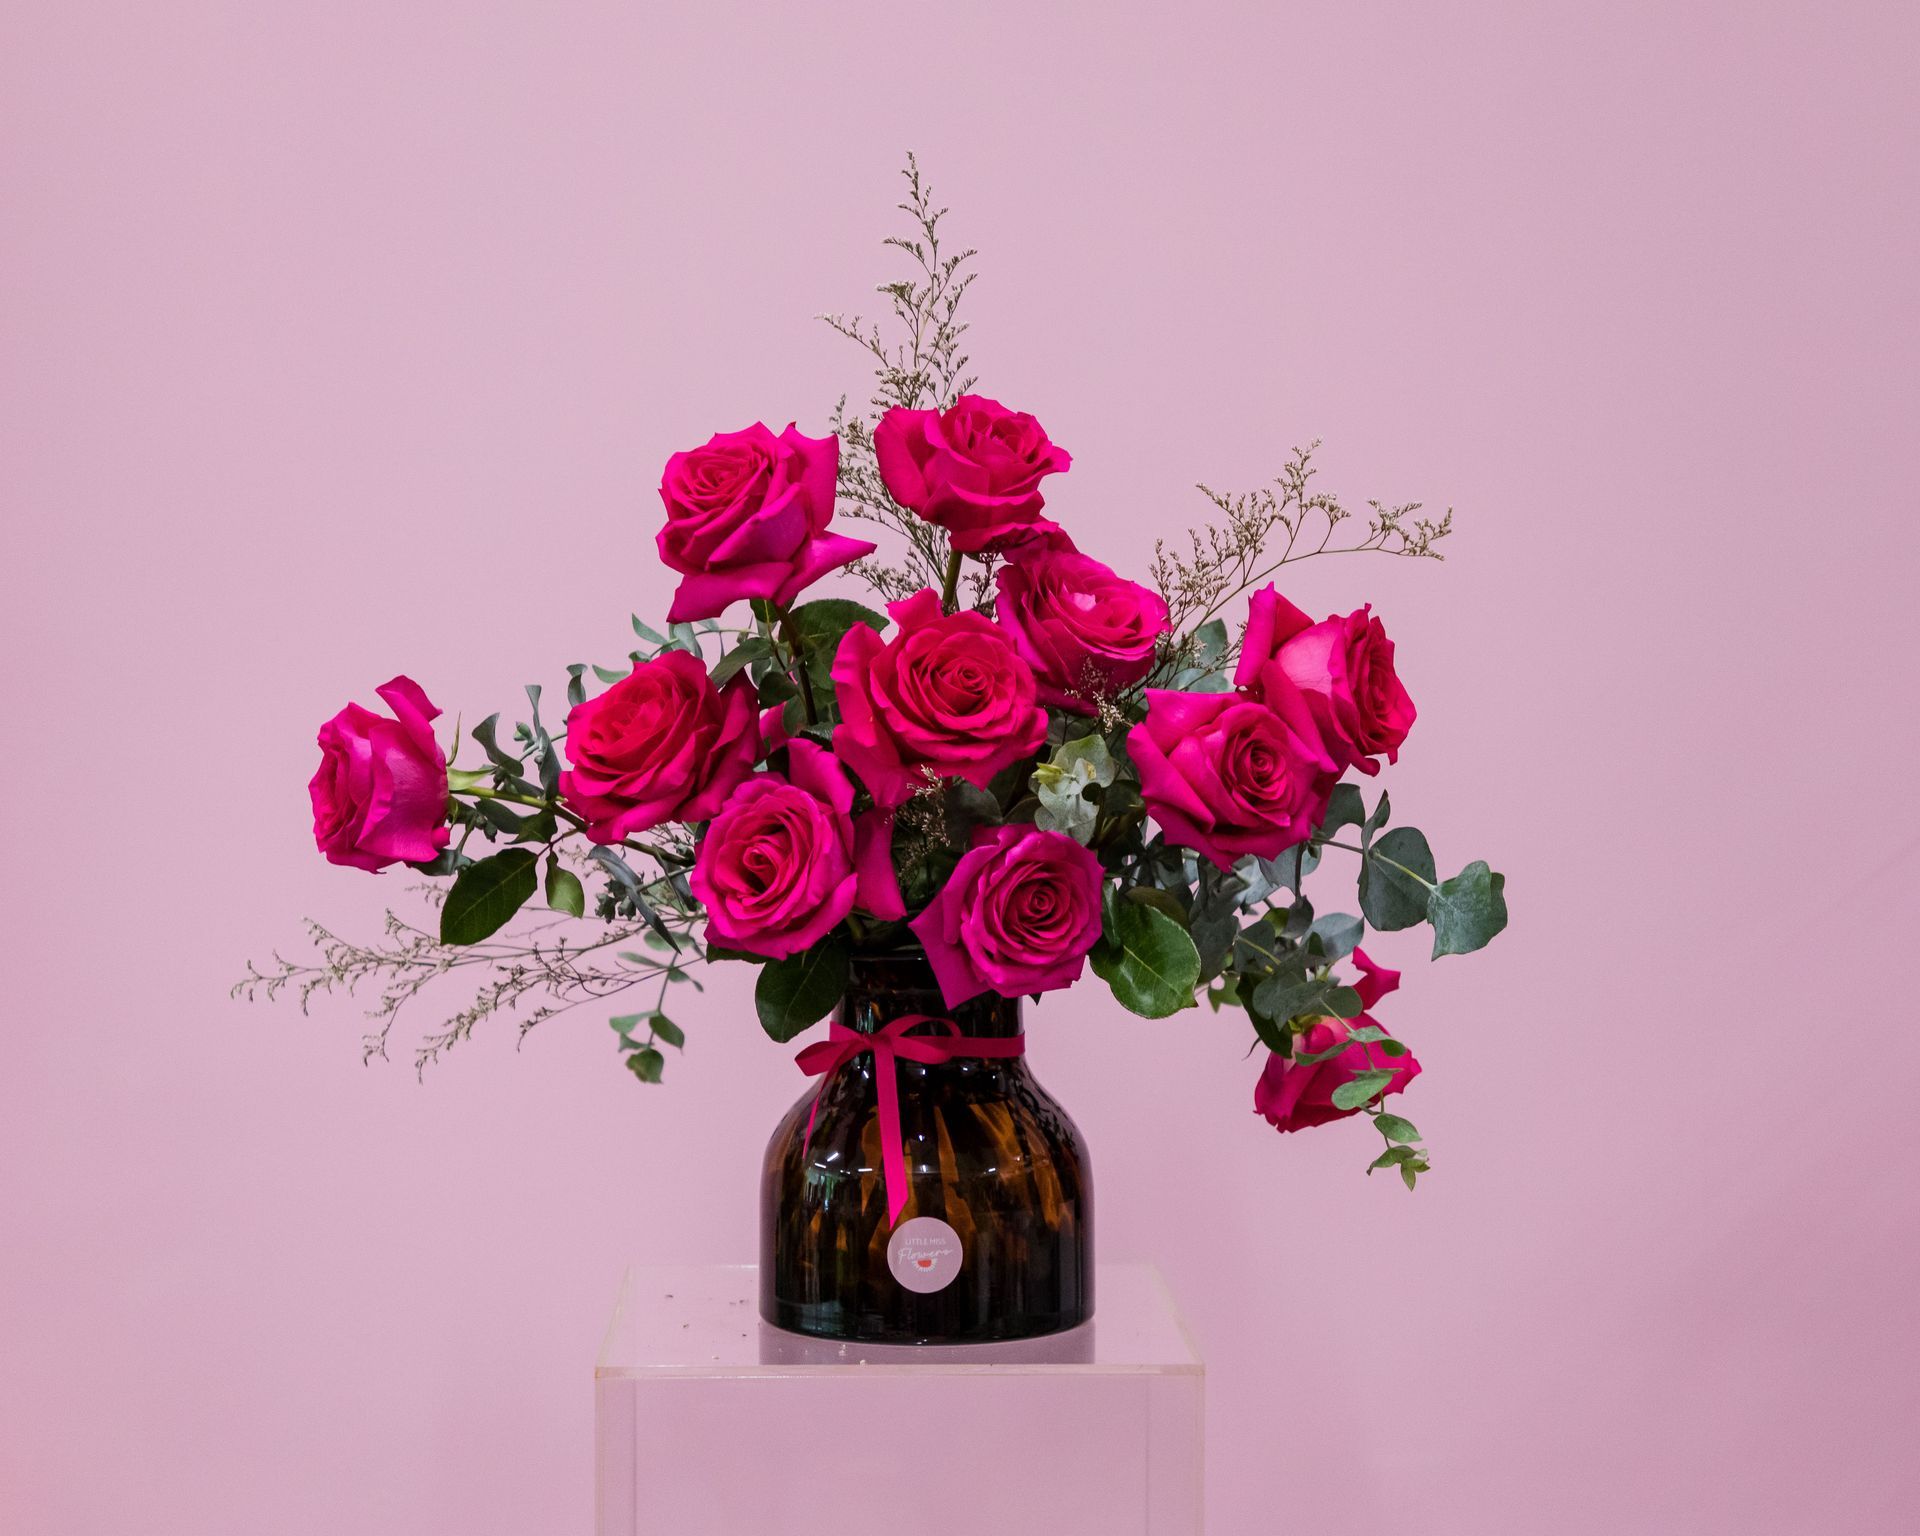 Expertly crafted bouquet by Darwin's floral artists, celebrating nature's palette.